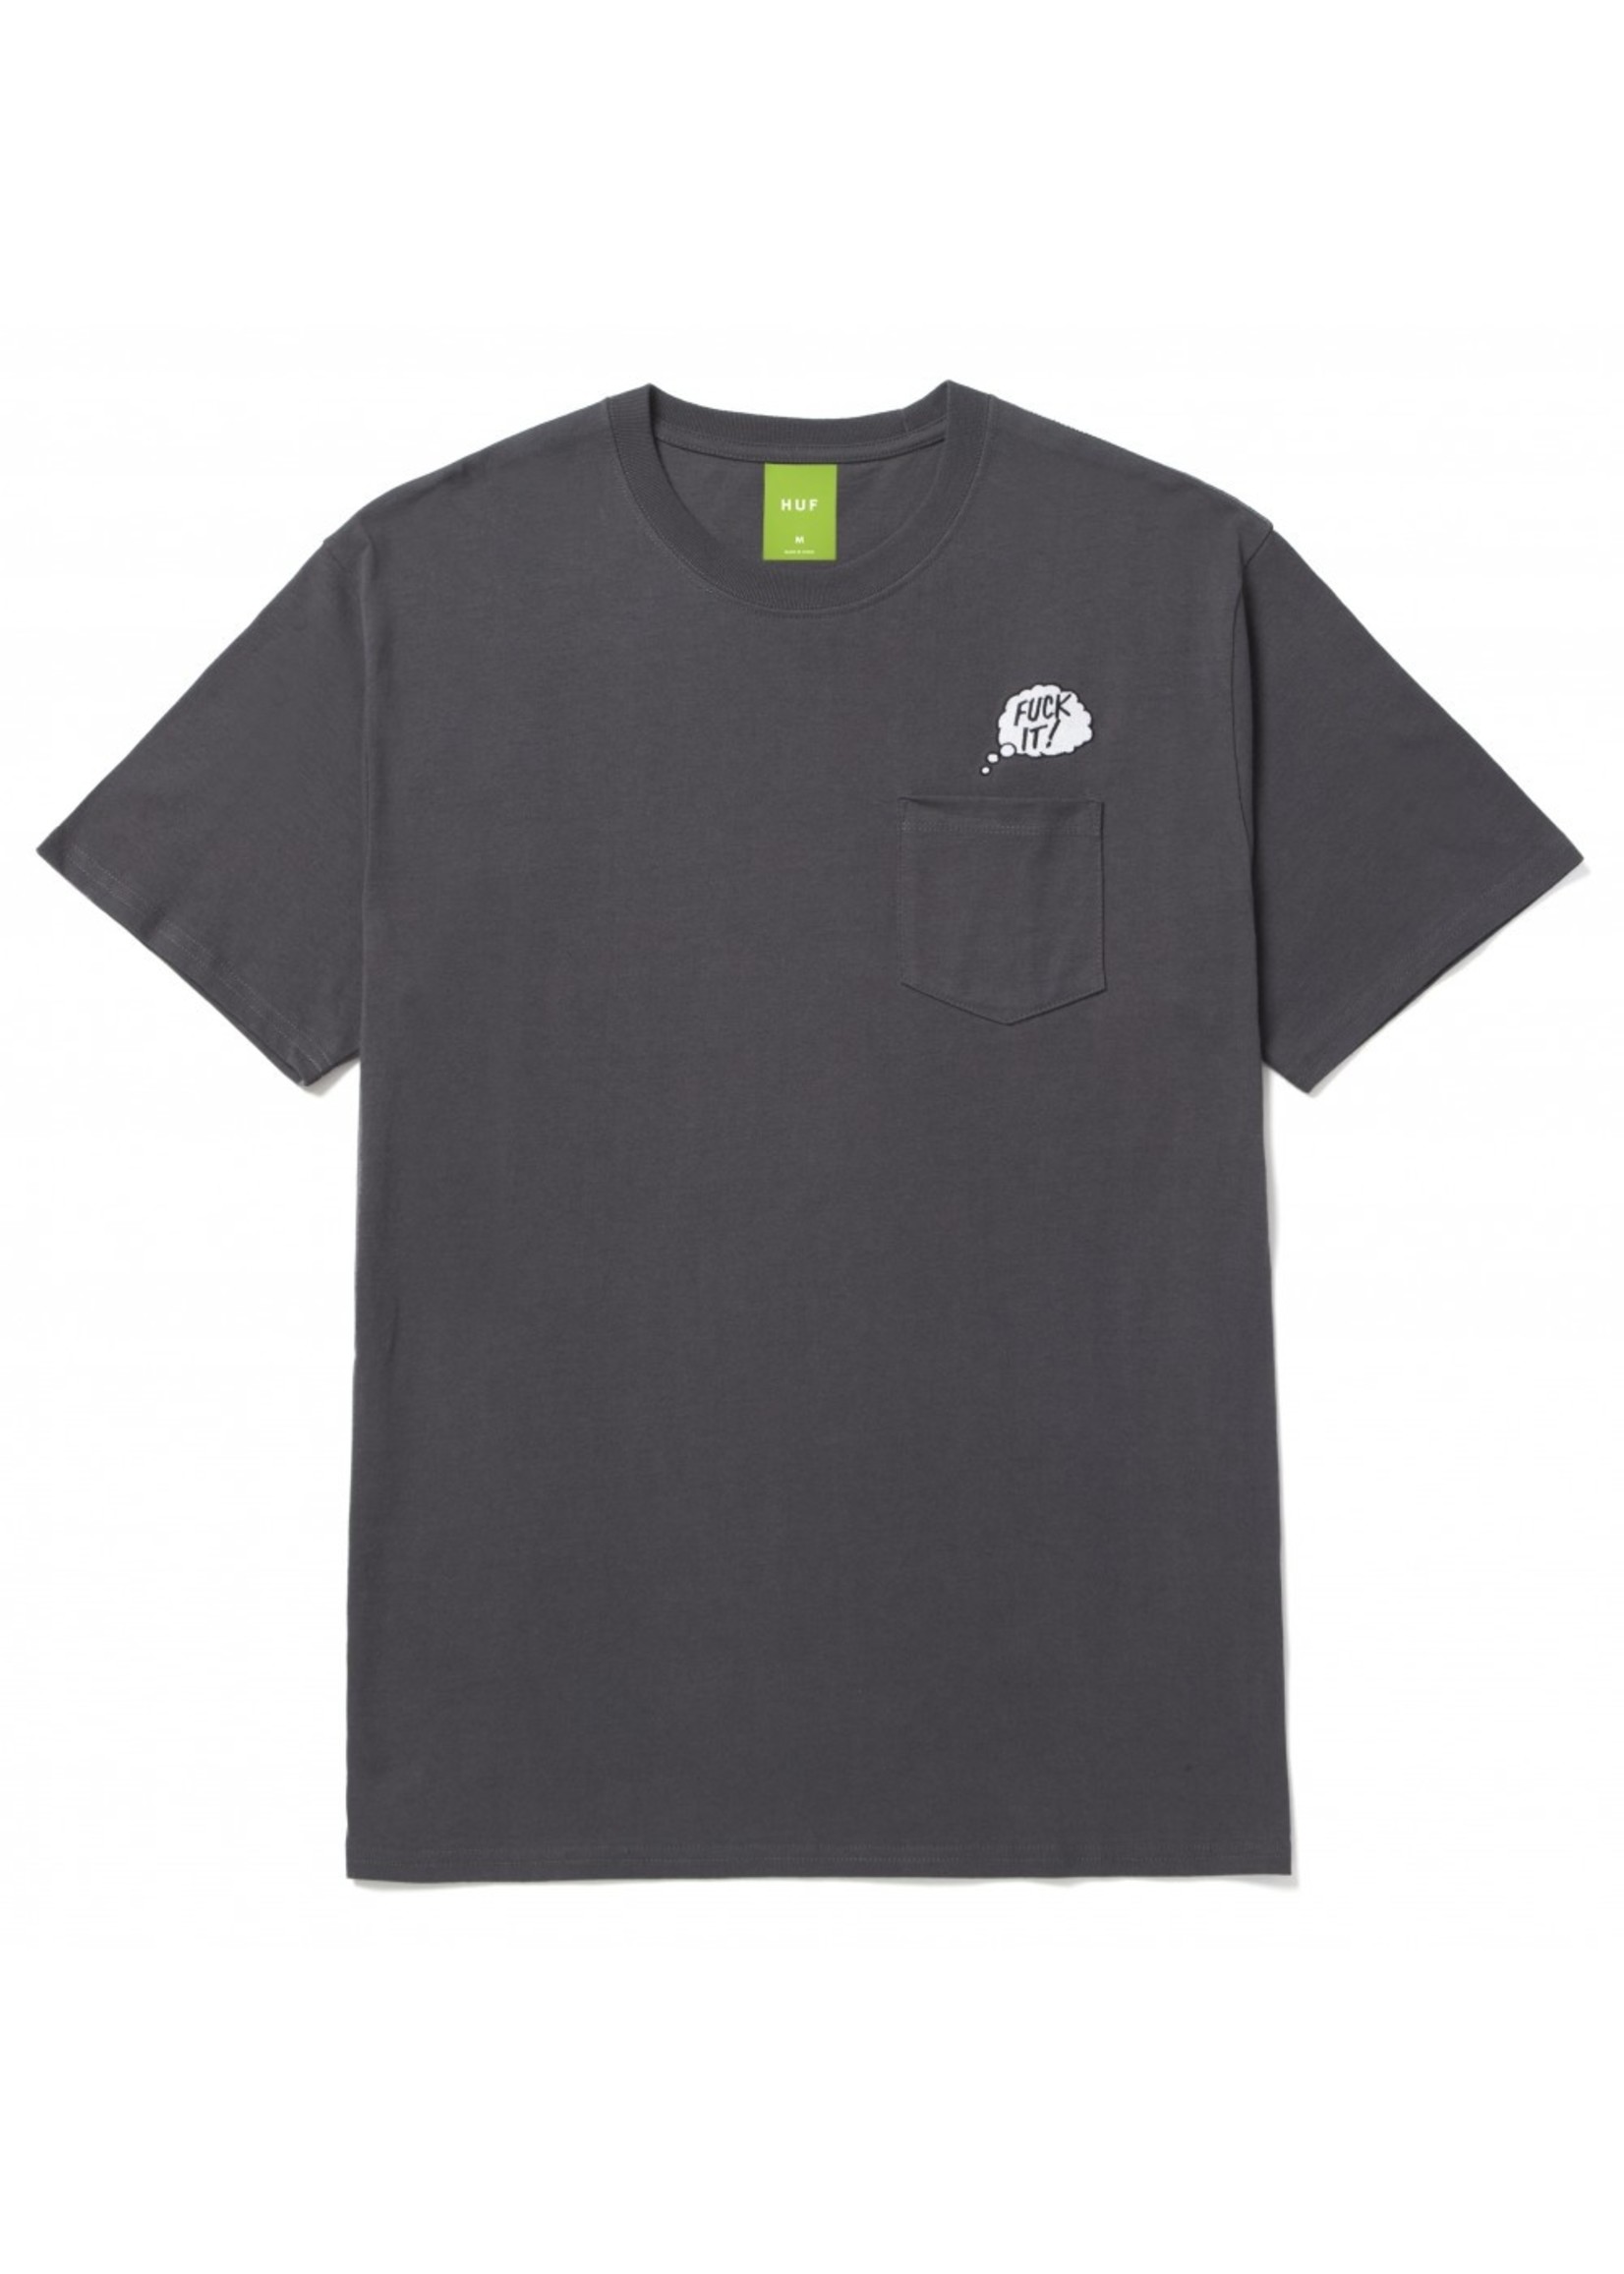 HUF In the Pocket S/S Tee Charchoal TS01723-CHARC